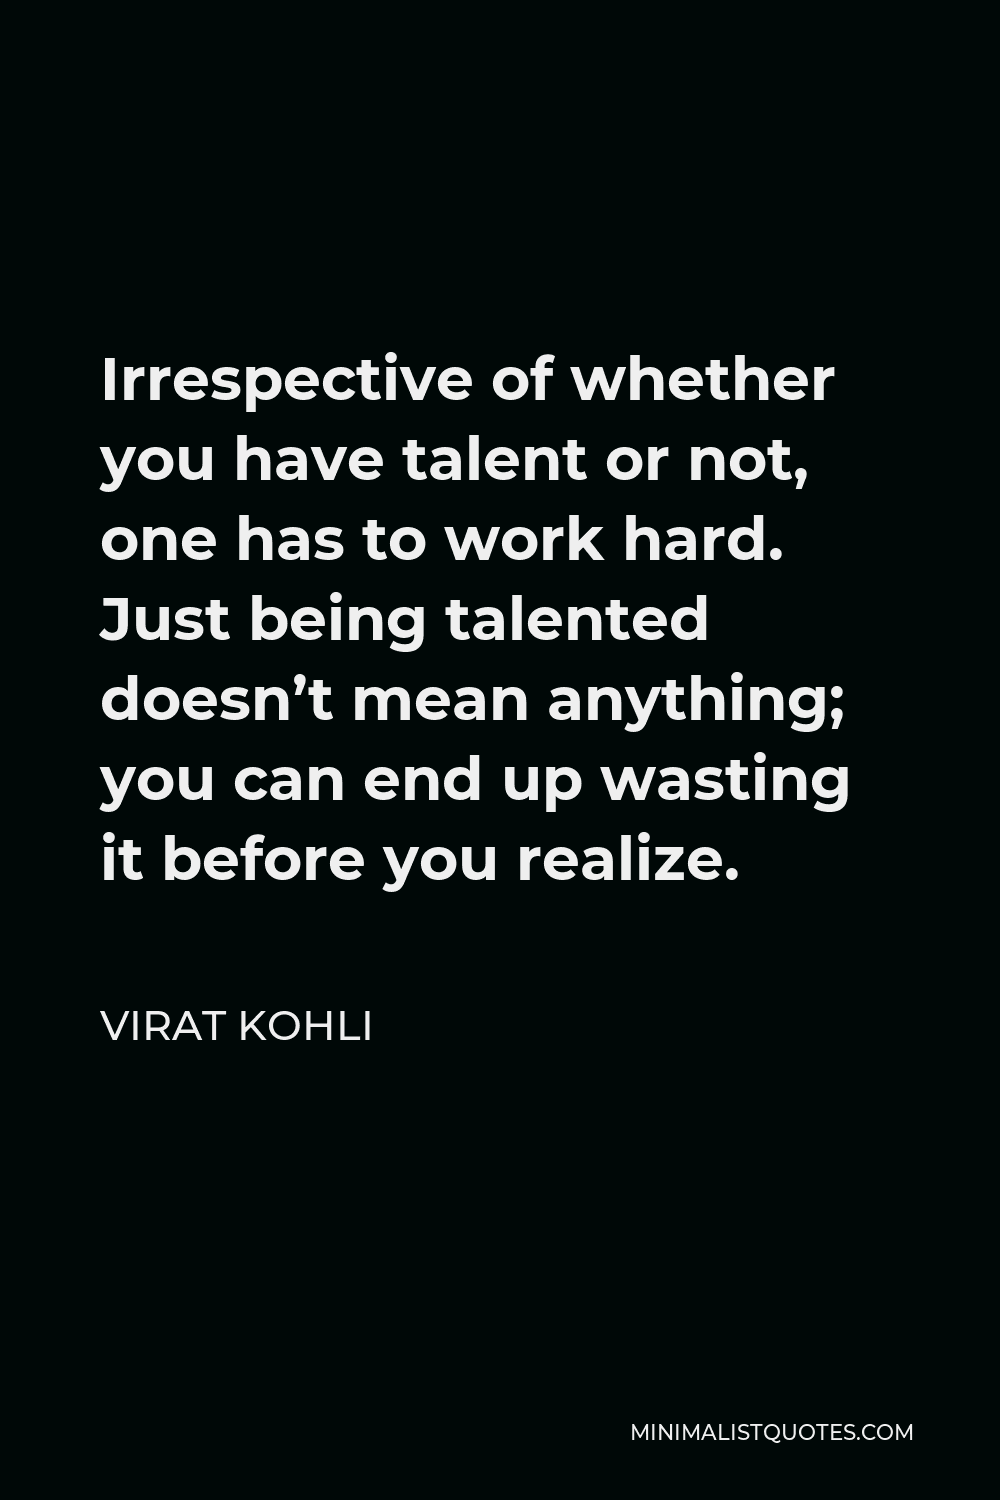 Virat Kohli Quote - Irrespective of whether you have talent or not, one has to work hard. Just being talented doesn’t mean anything; you can end up wasting it before you realize.